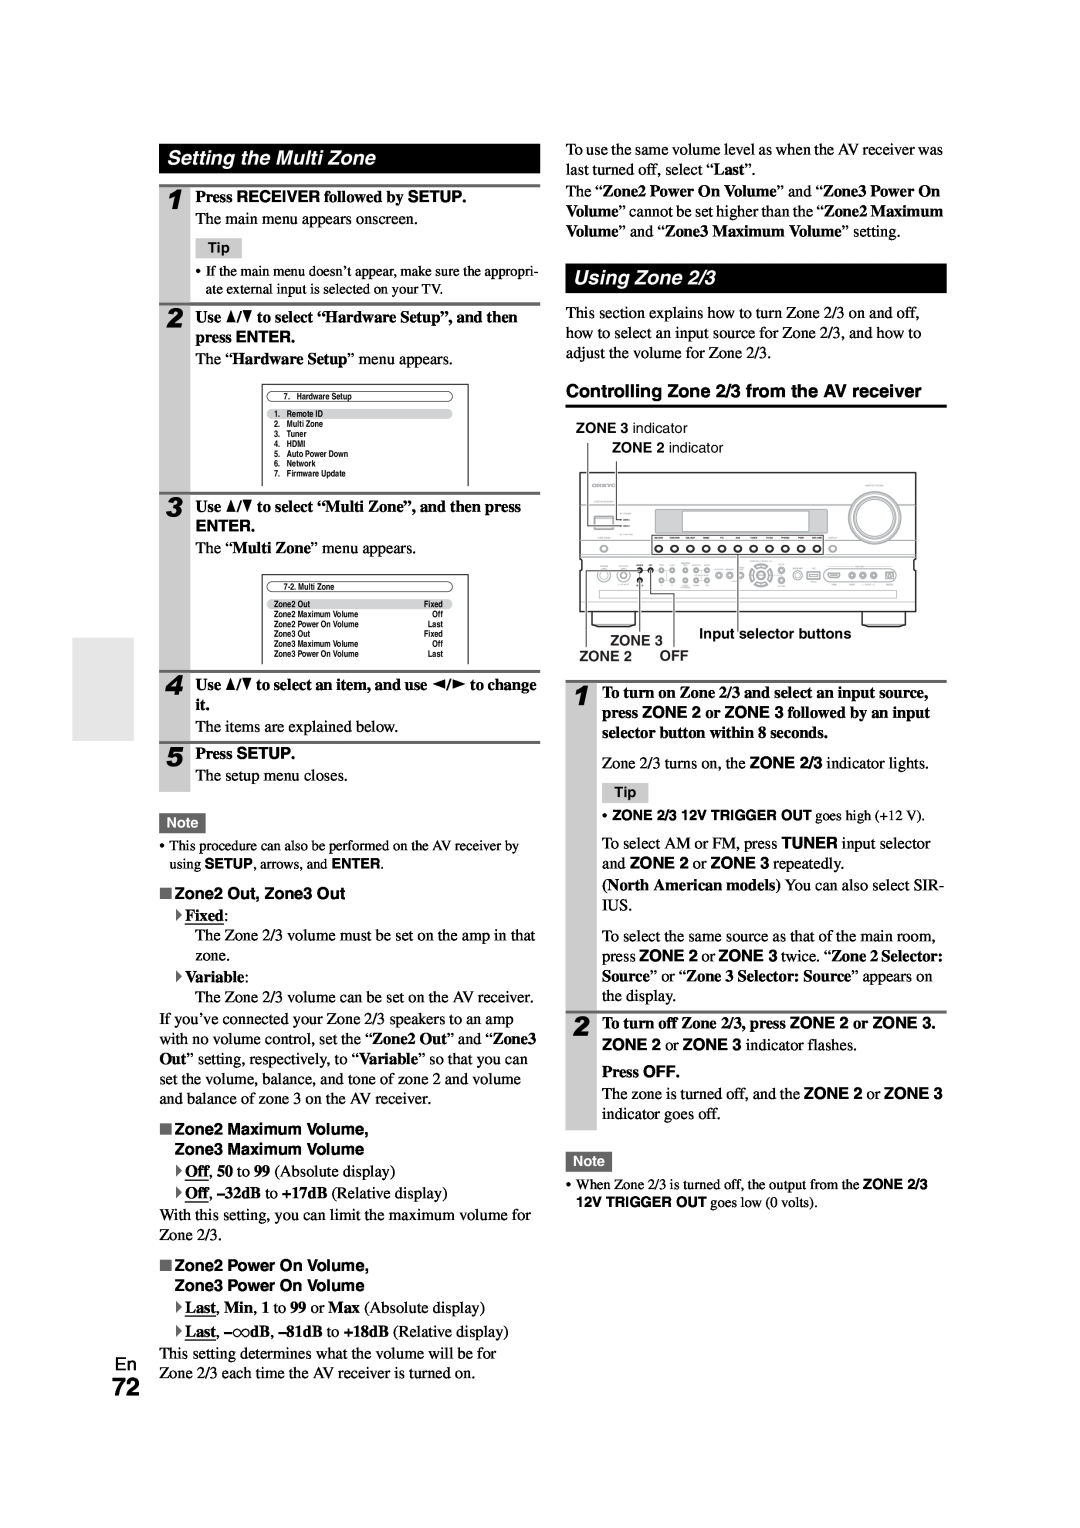 Onkyo TX-NR808 instruction manual Setting the Multi Zone, Using Zone 2/3, Controlling Zone 2/3 from the AV receiver, Enter 